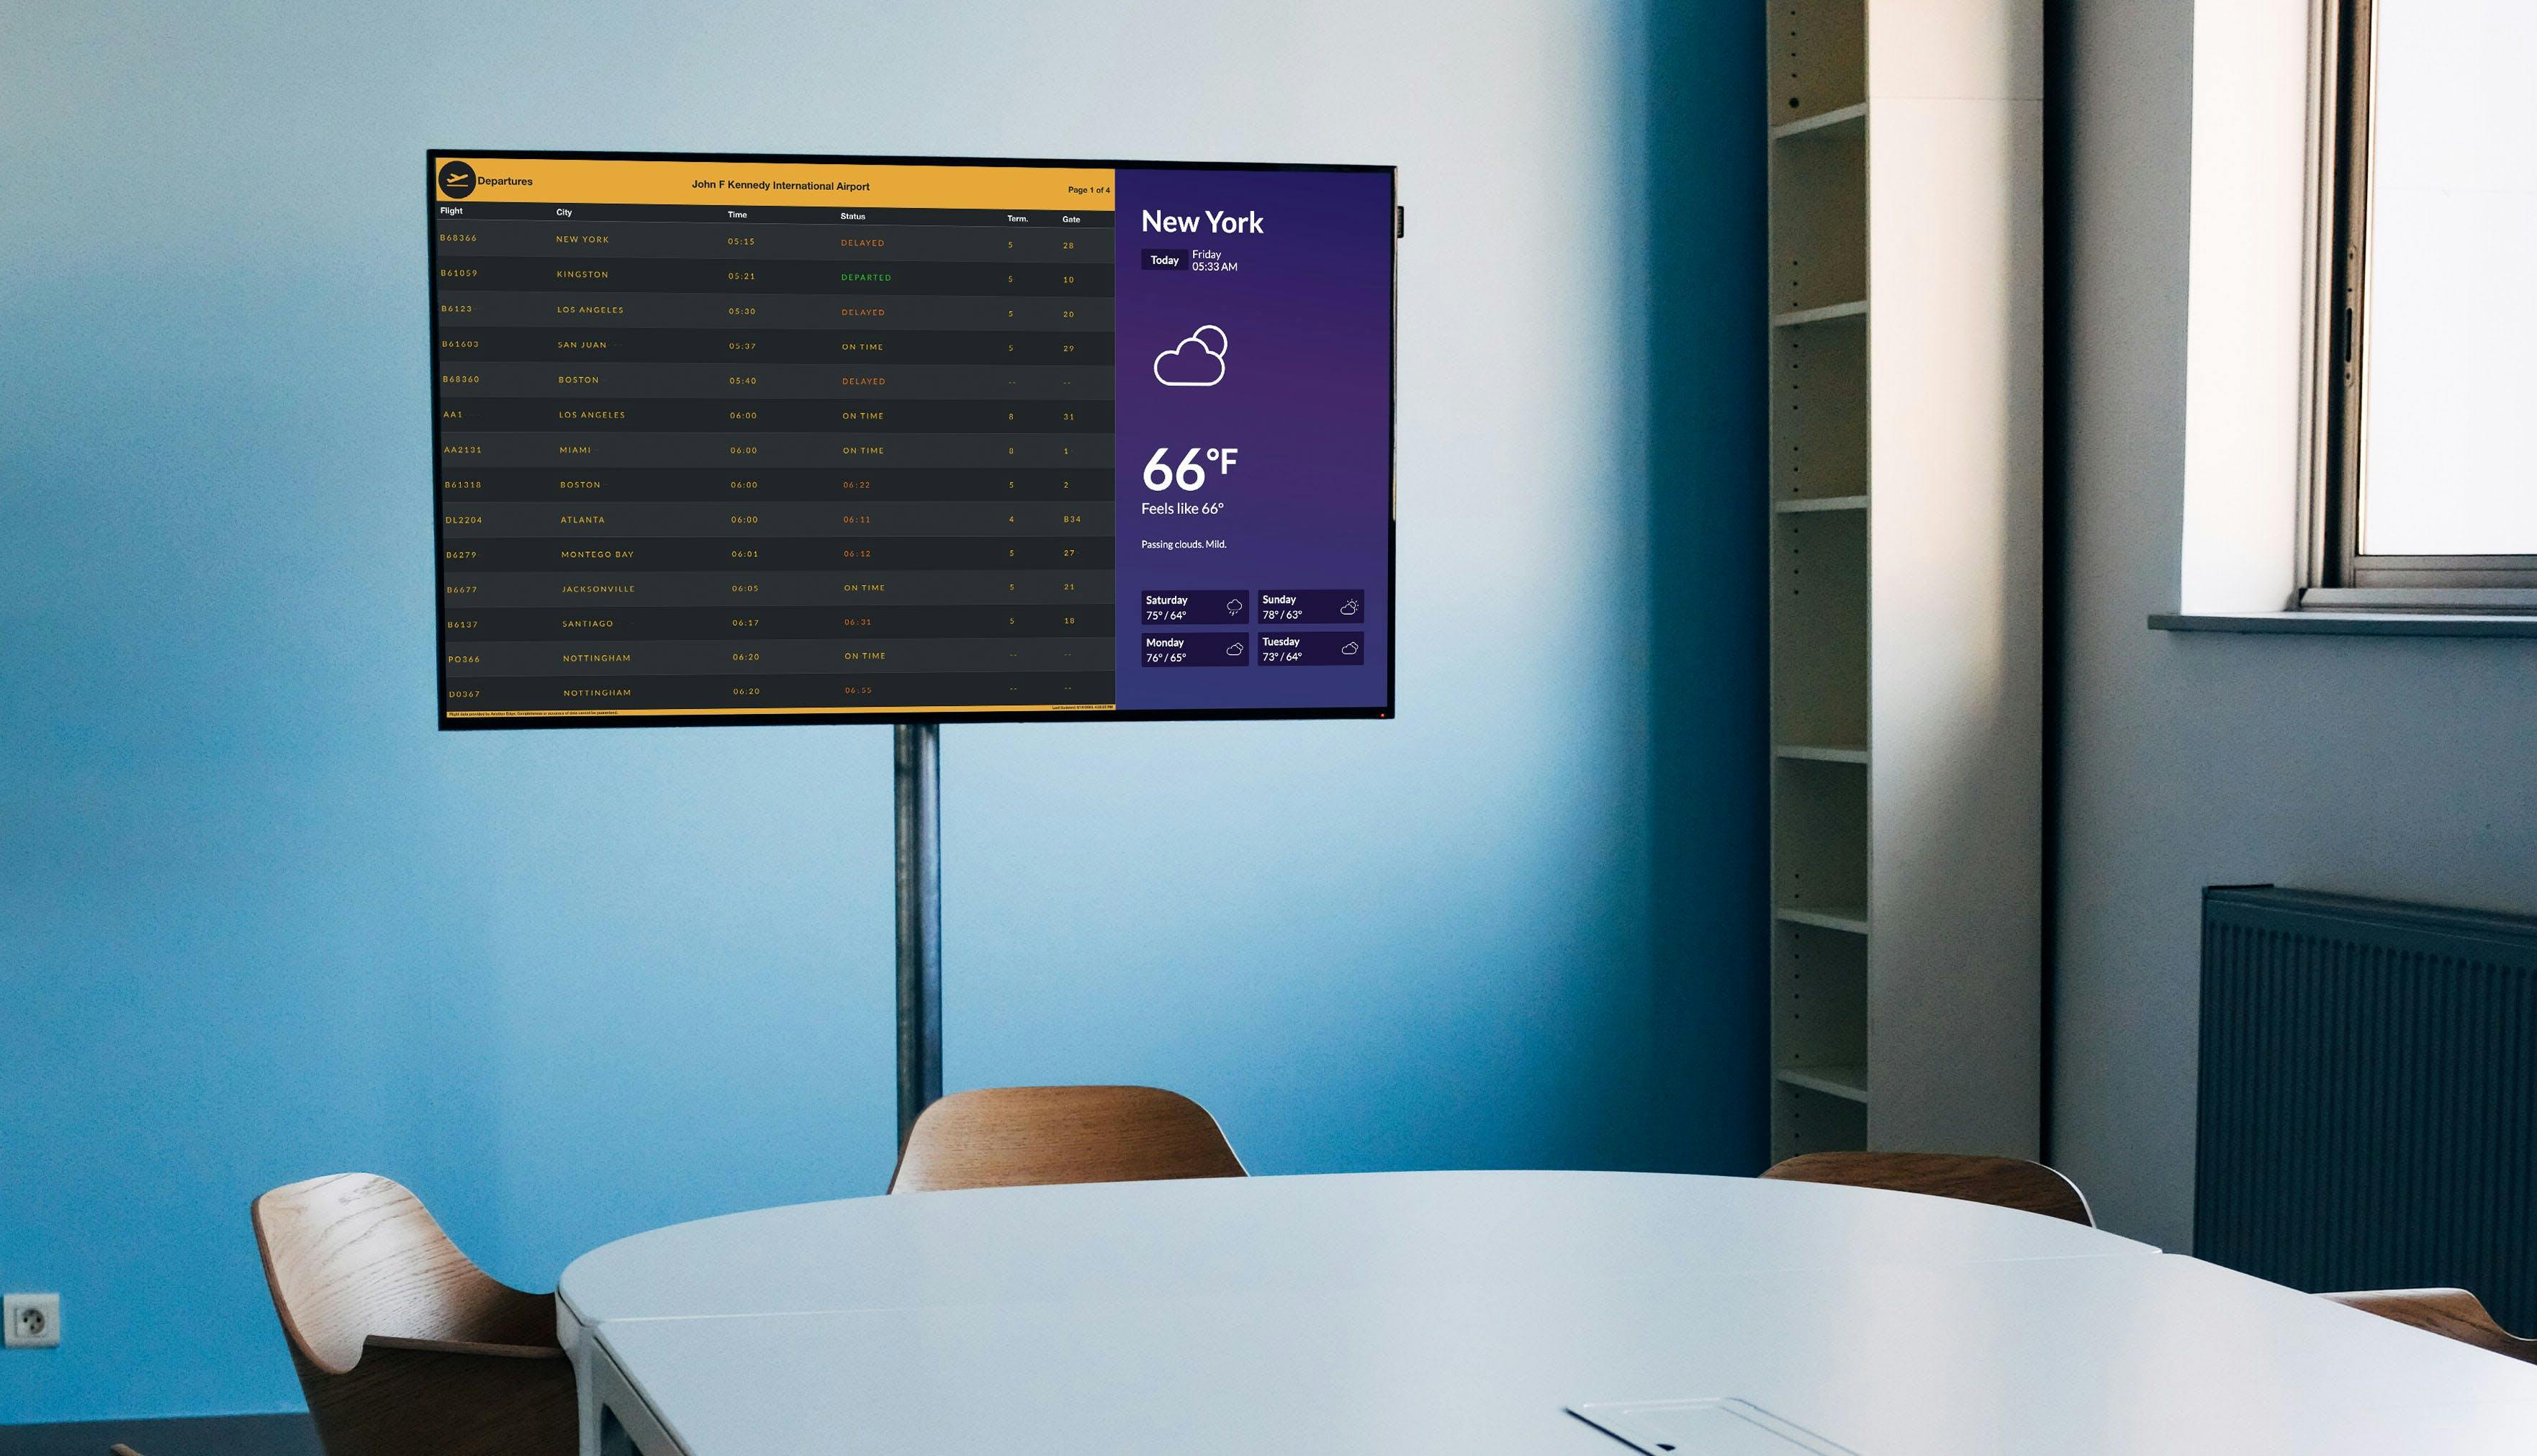 ScreenCloud Article - Building Smart Digital Signage With Automation